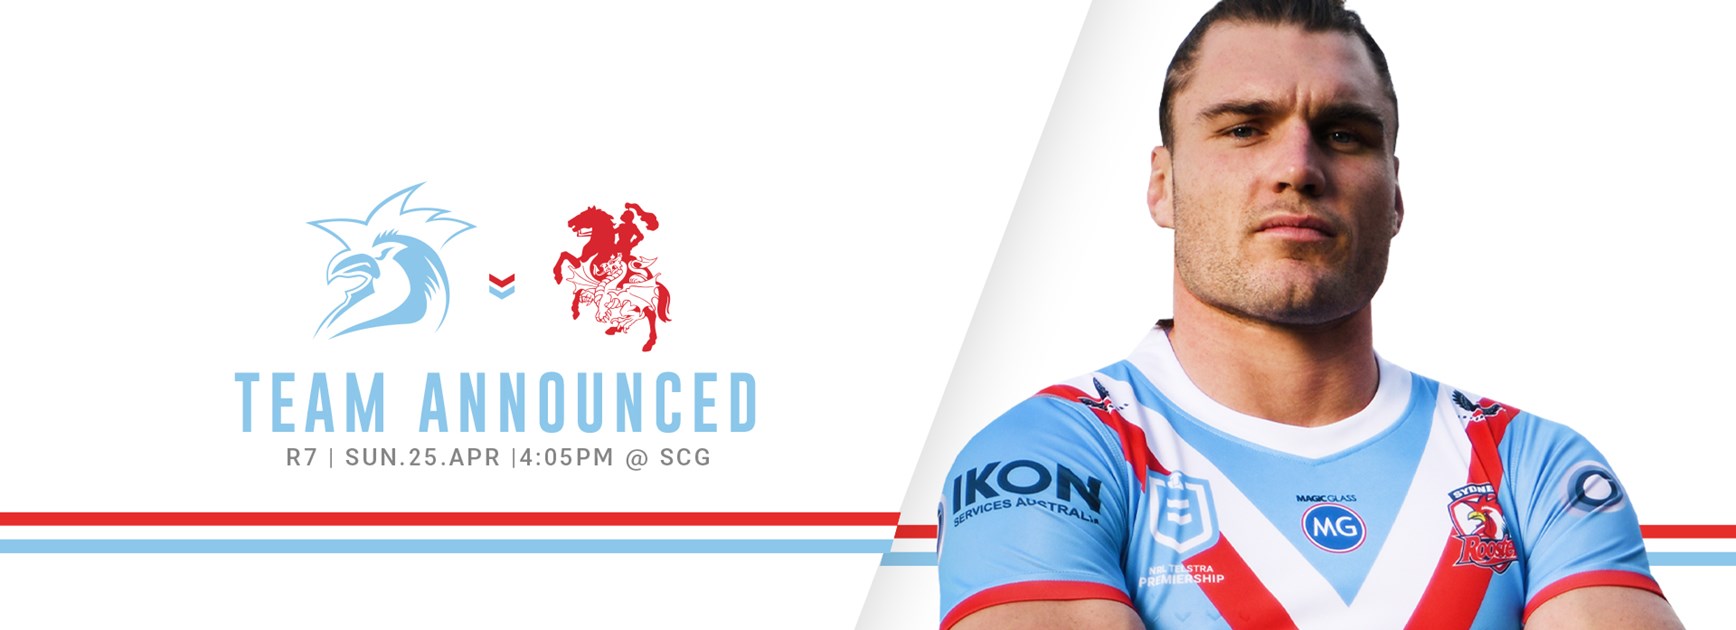 UPDATE: Line up for Round 7 Anzac Day Cup vs Dragons Announced